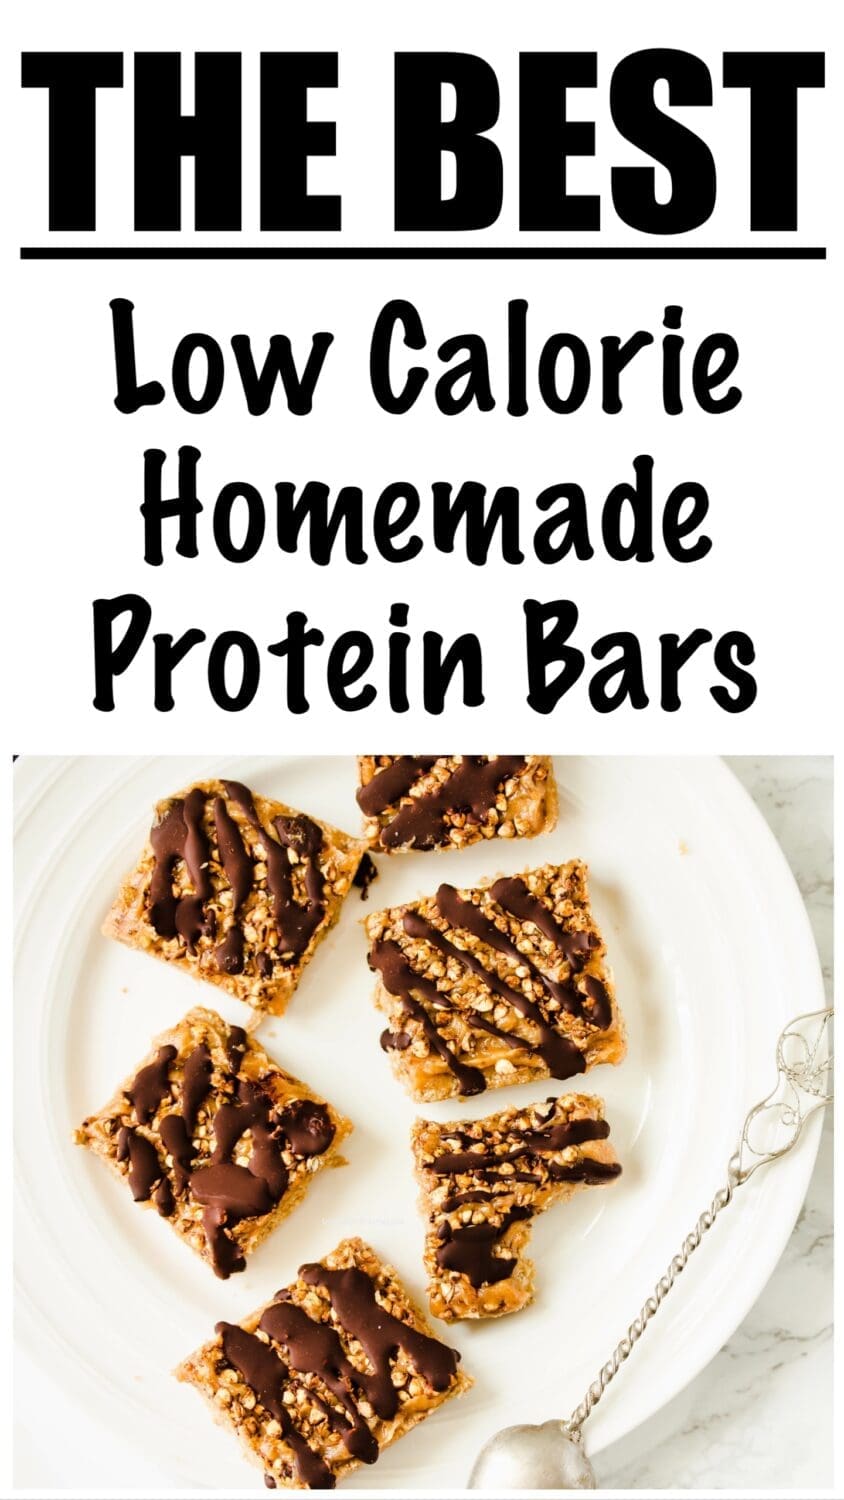 Healthy Protein Bars